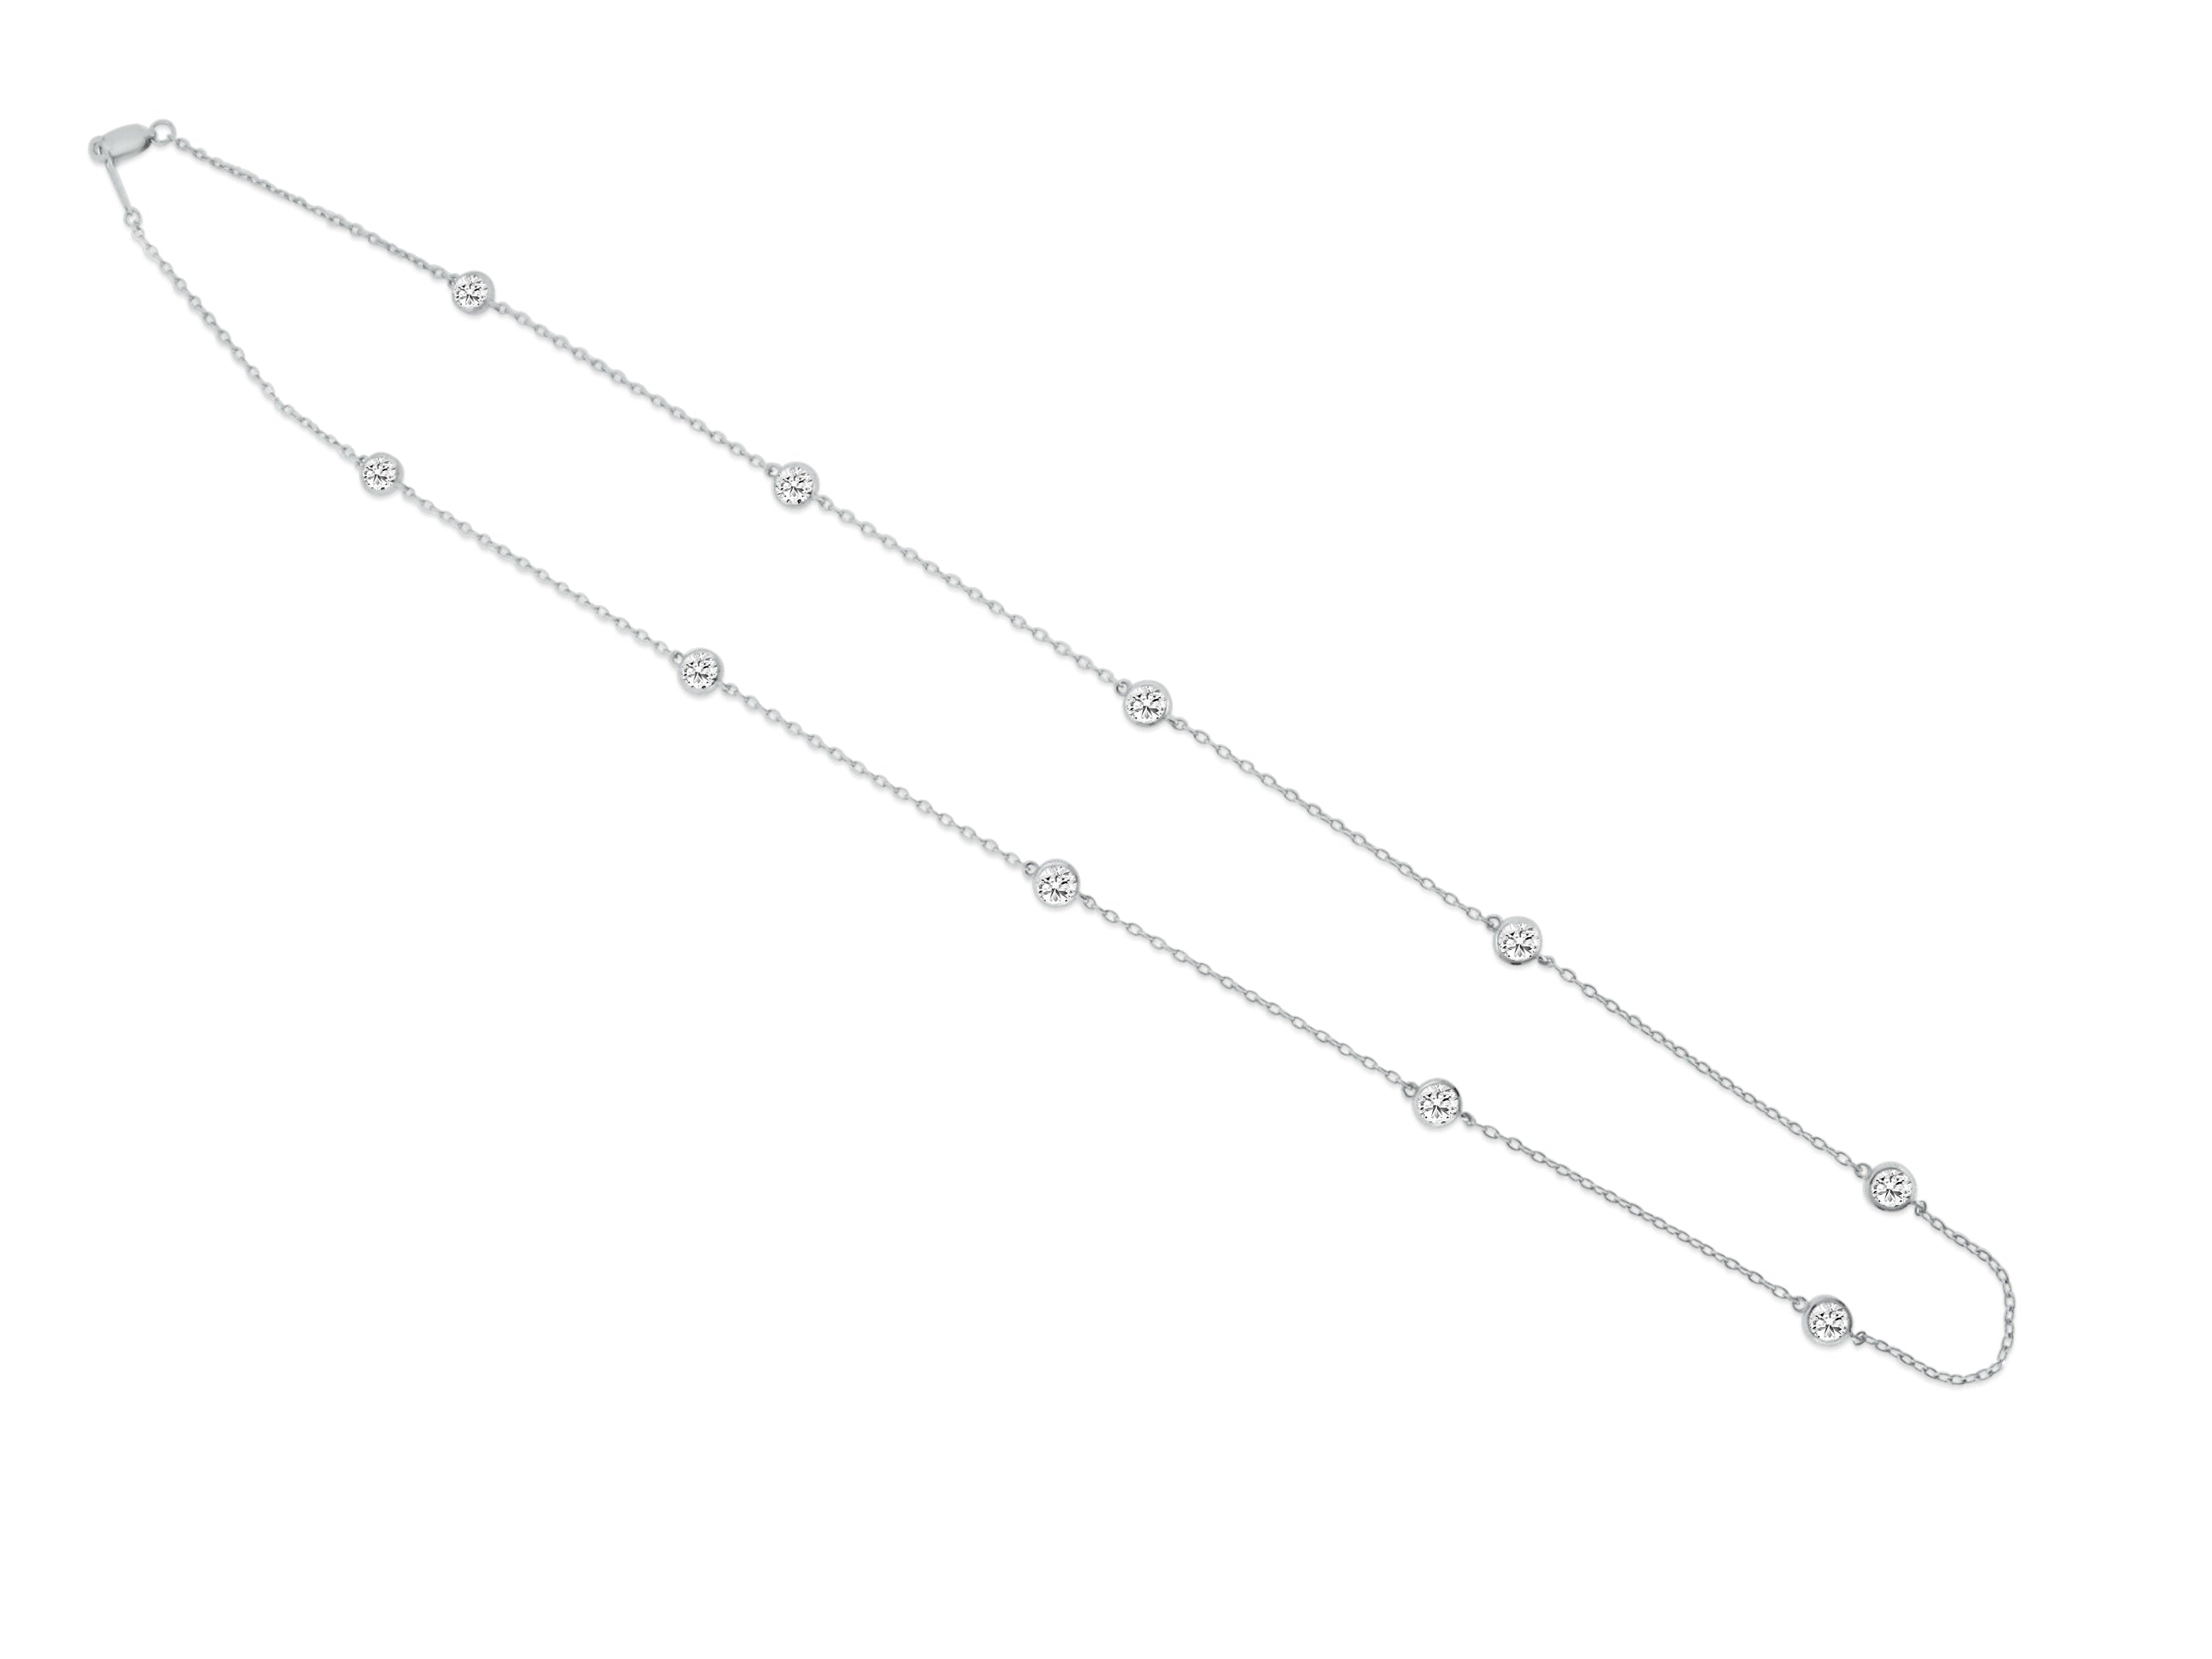 MULLOYS PRIVE'14K WHITE GOLD  2.06CT SI1-2 CLARITY G-H COLOR DIAMOND BY YARD NECKLACE 16/18/20 INCH ADJUSTABLE LENGTHS